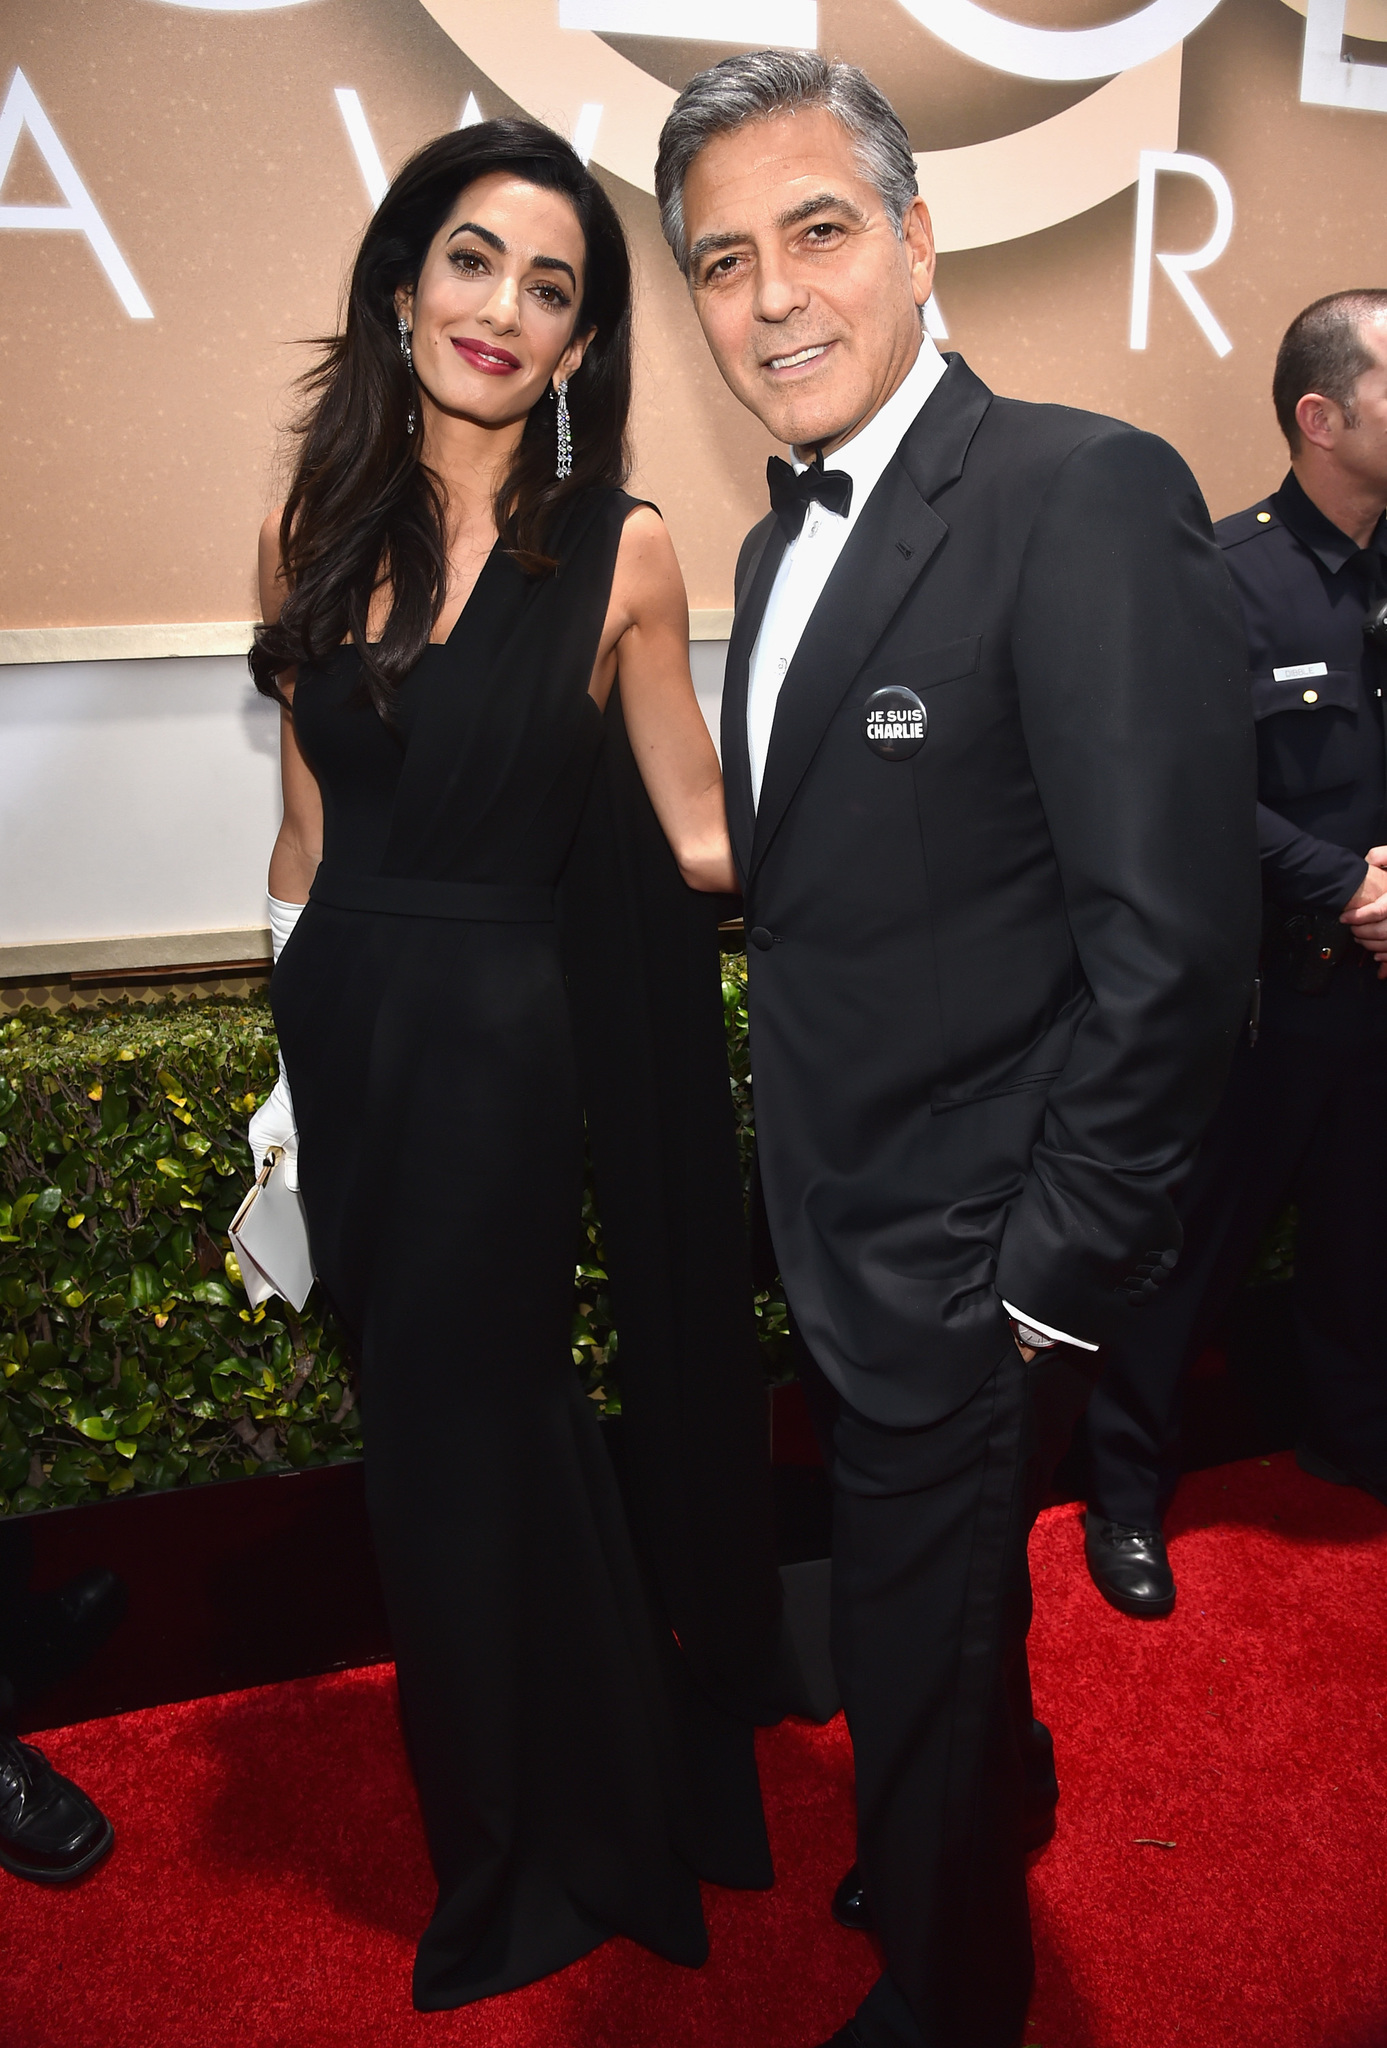 George Clooney and Amal Clooney at event of 72nd Golden Globe Awards (2015)